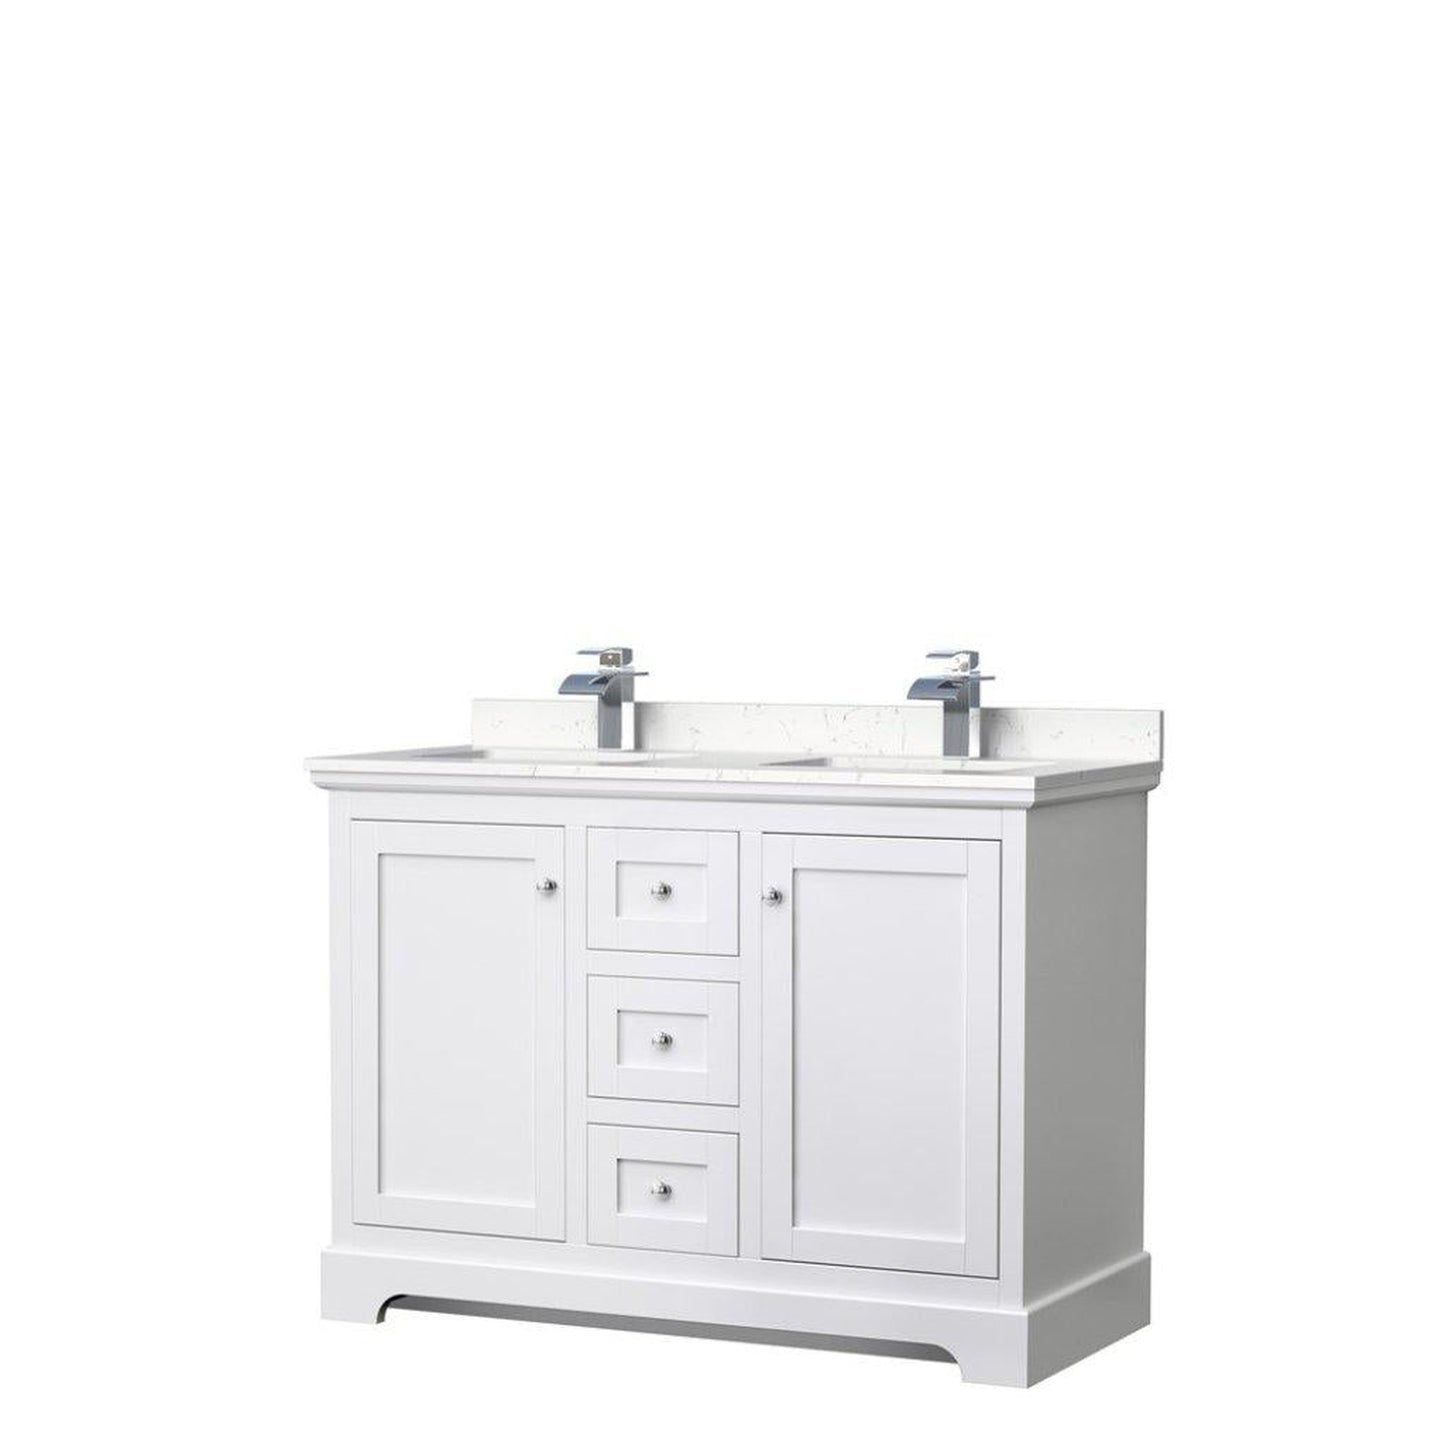 Wyndham Collection Avery 48" White Double Bathroom Vanity, Light-Vein Carrara Cultured Marble Countertop With 1-Hole Faucet, Square Sink, Polished Chrome Trims